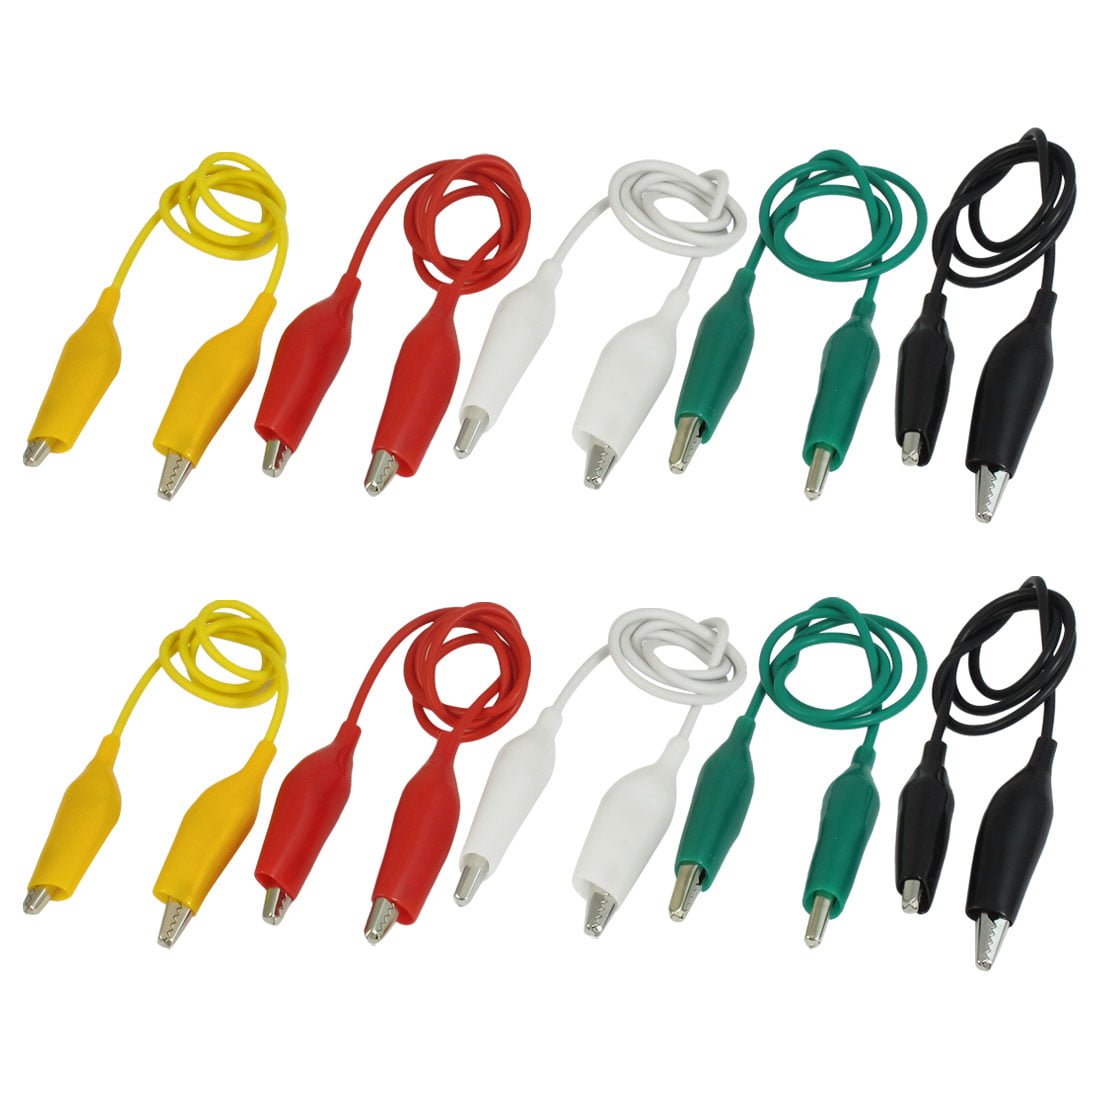 Magic Shell 10 Set 14 Double-ended Alligator Clips Wire Crocodile Clips Cable 10 PCS/Set